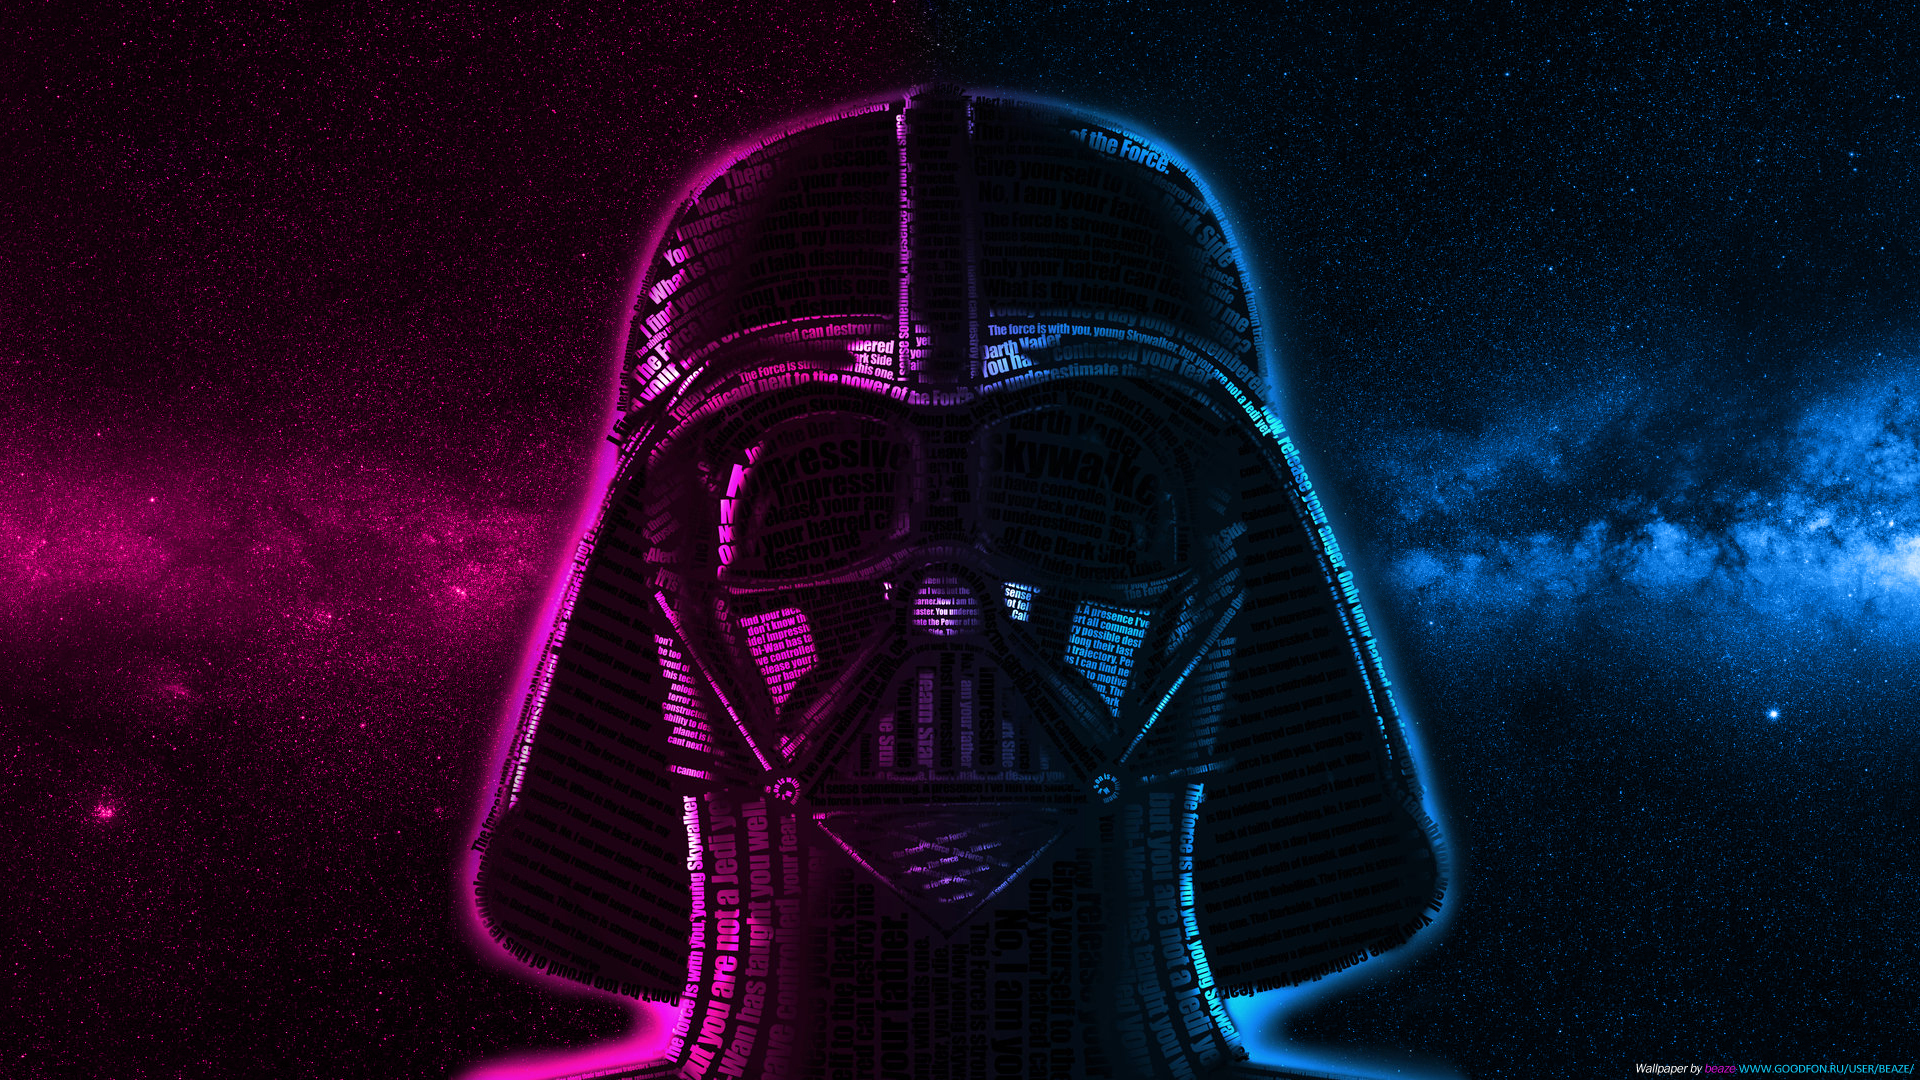 Wallpapers darth wader words out on the desktop